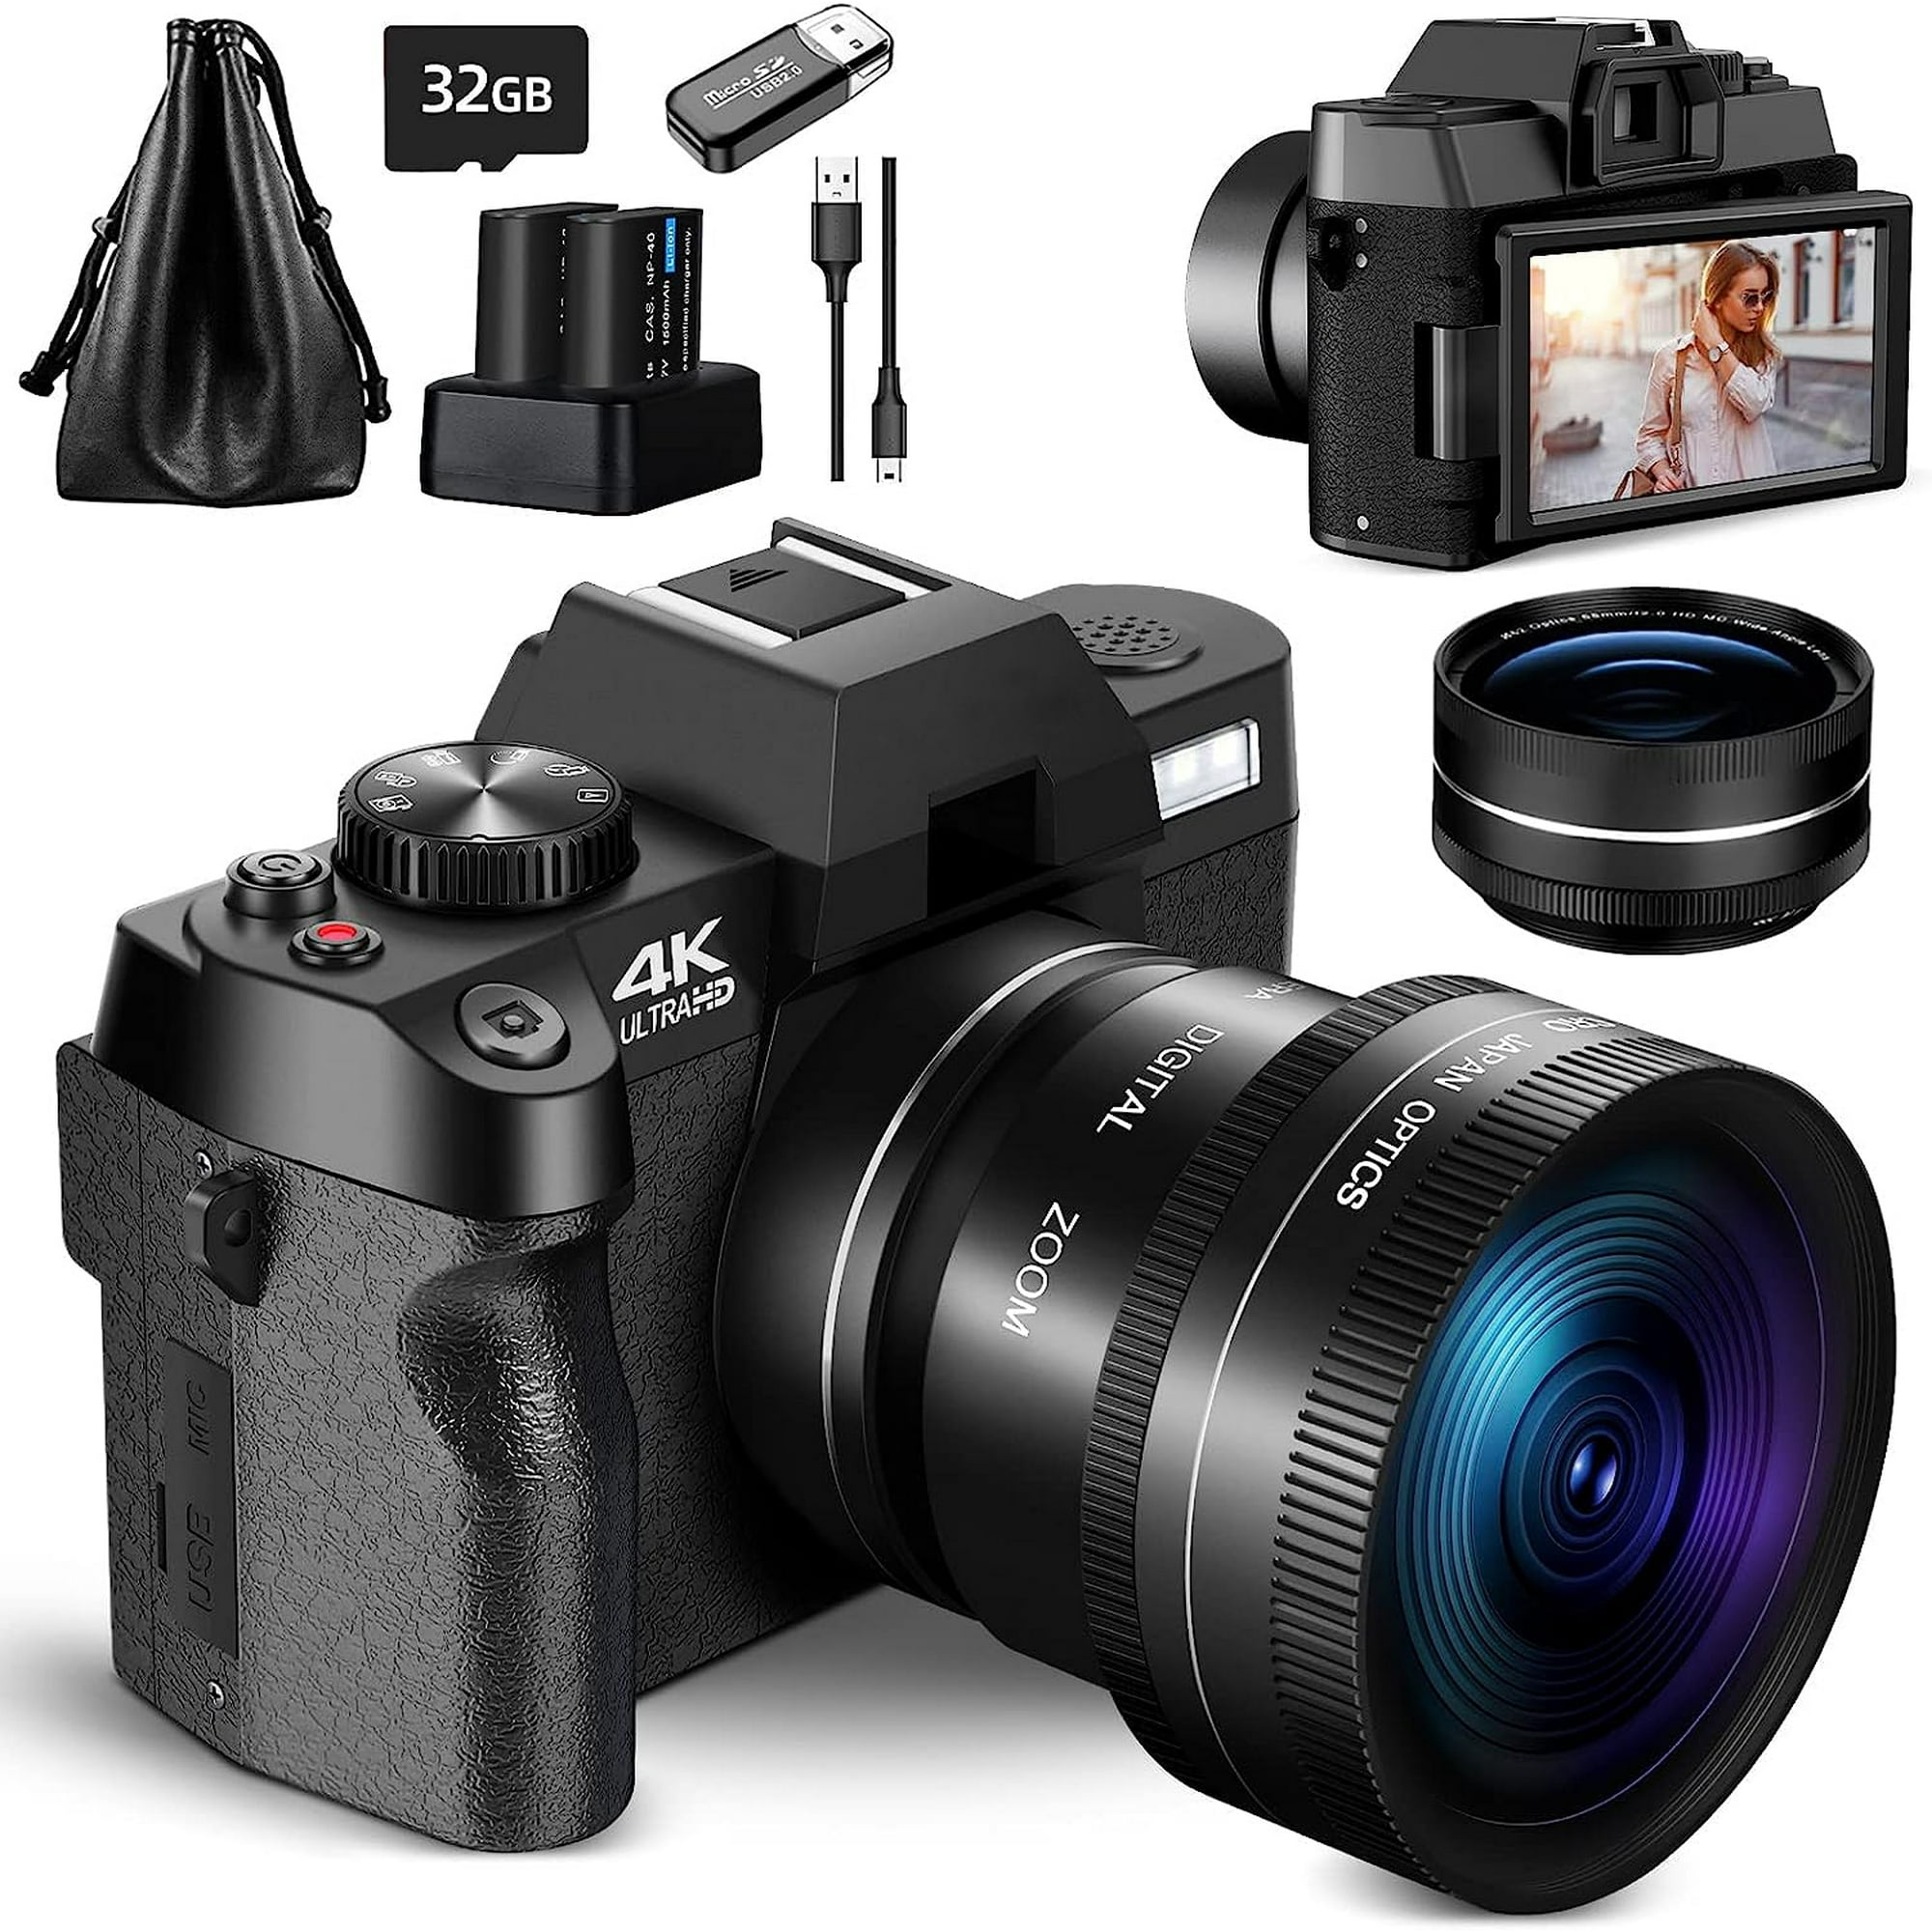 NBD Digital Camera 4K Ultra HD 48MP All-in-One Vlogging Camera with Wide Angle Lens, Digital Zoom 16x and 3″ Screen